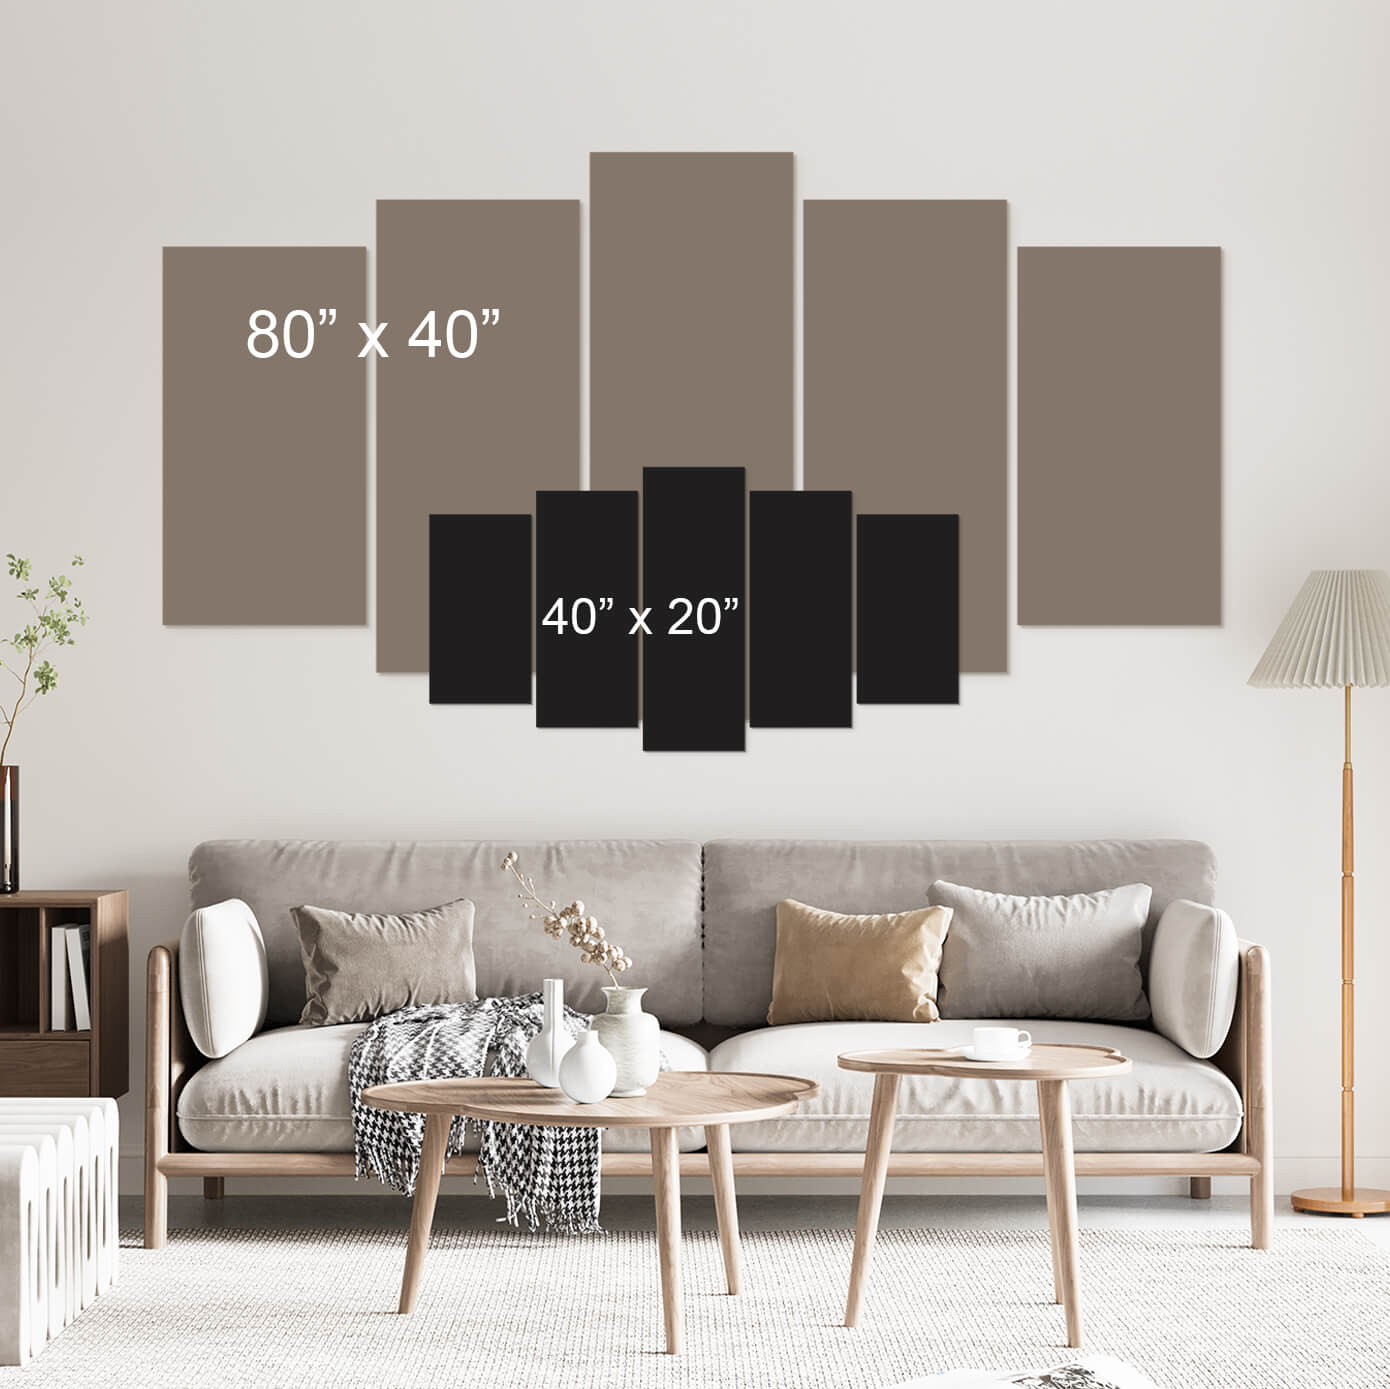 Stretched Canvas Places - Nights In Dubai-Tiptophomedecor